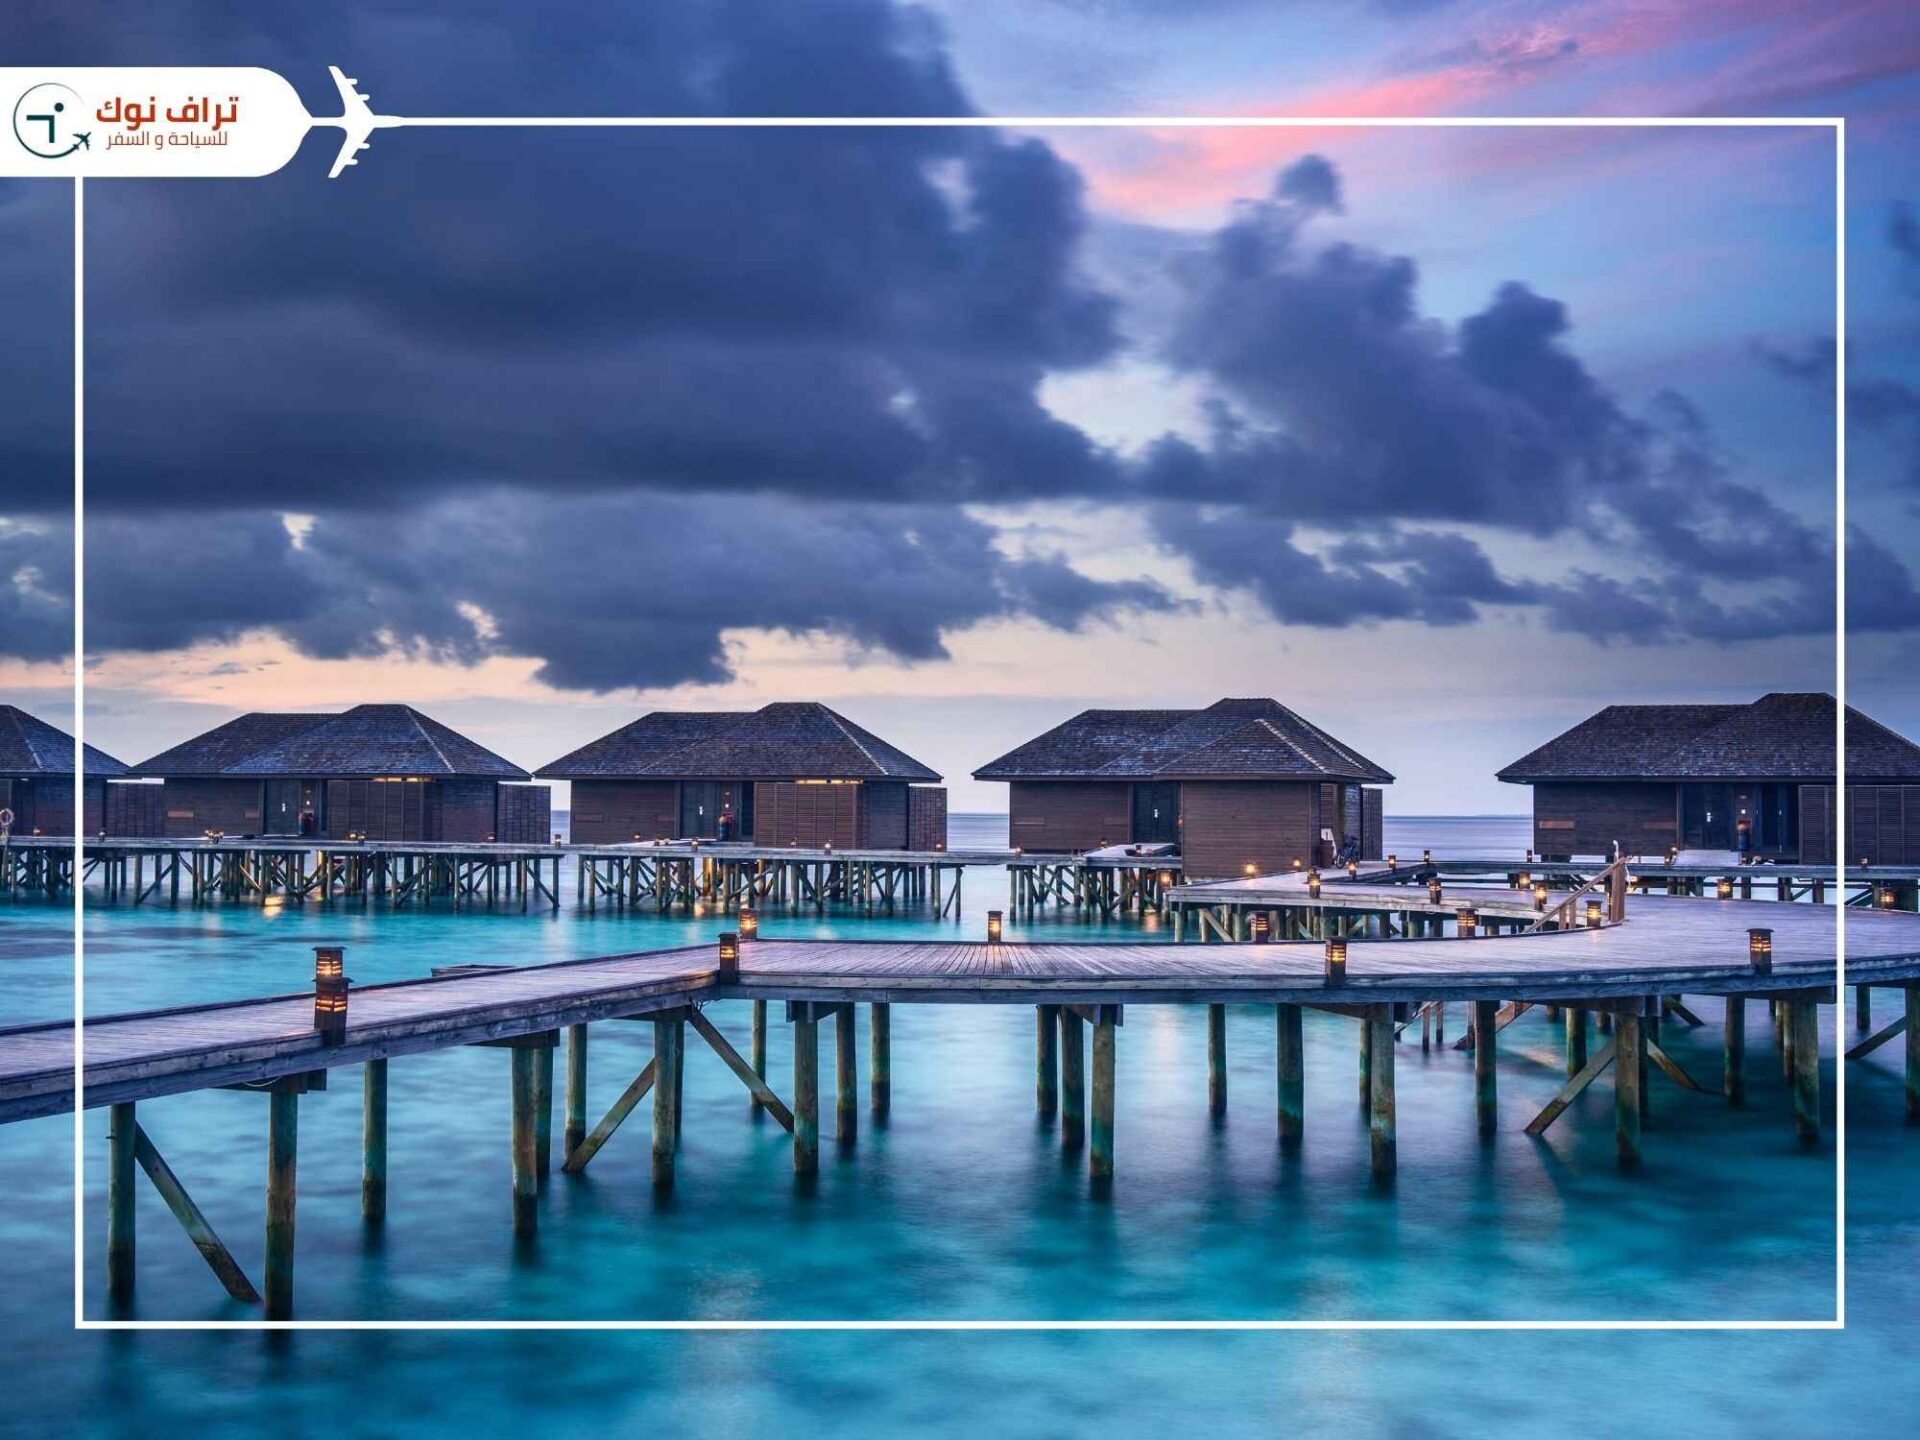 Places to visit during eid holidays from Dubai - Maldives